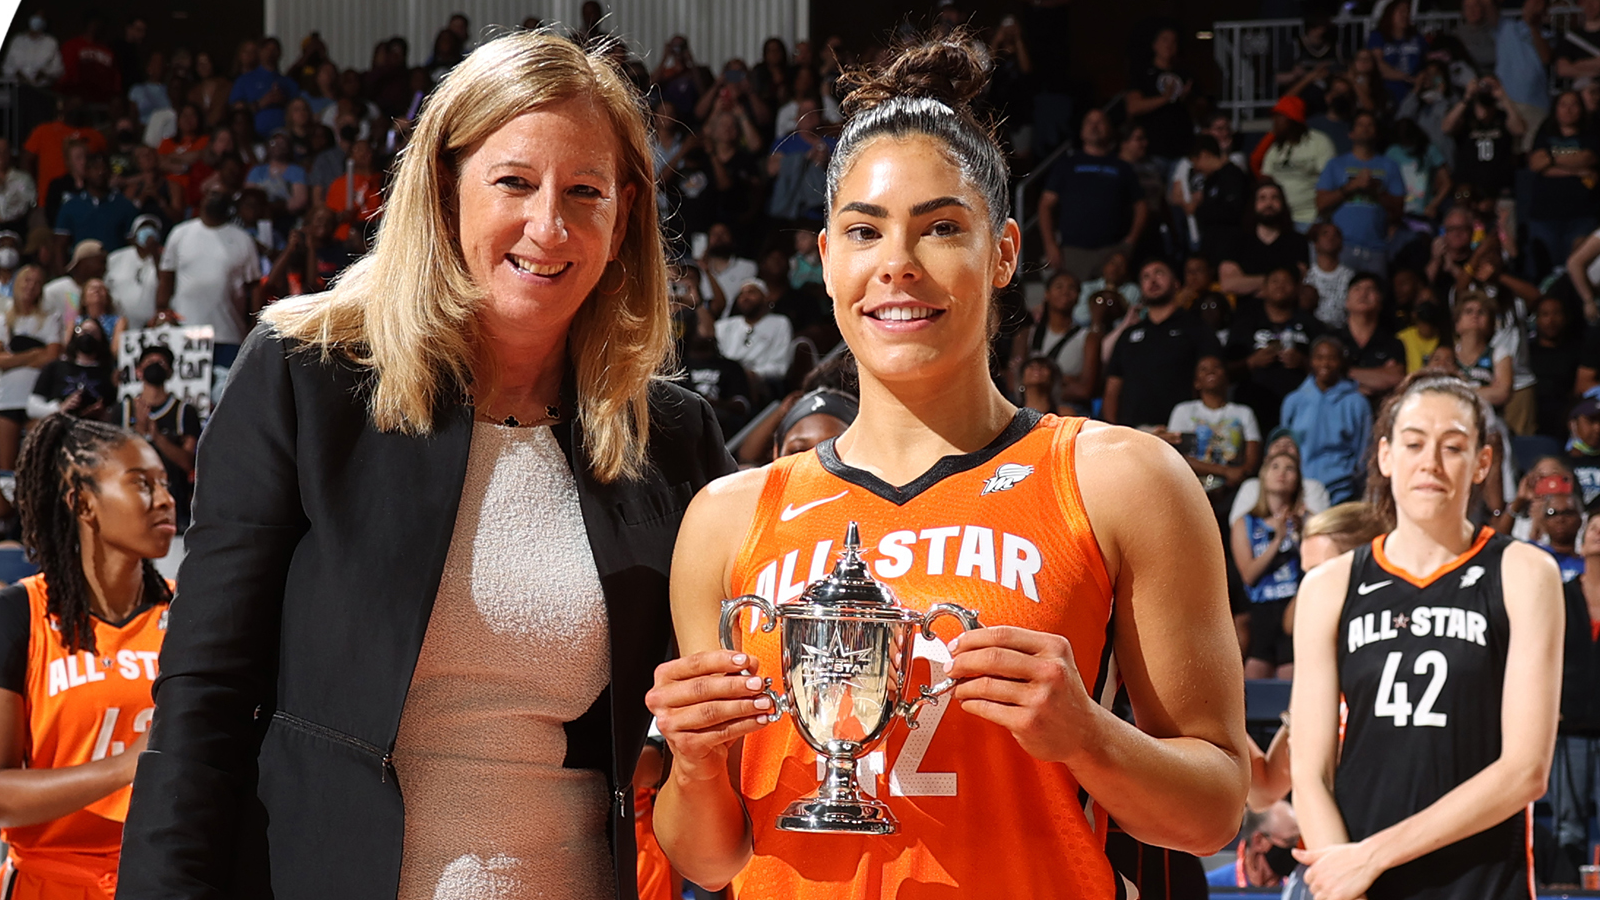 Team Wilson and MVP Kelsey Plum come away winners in 2022 All-Star Game, 134-112 victory over Team Stewart